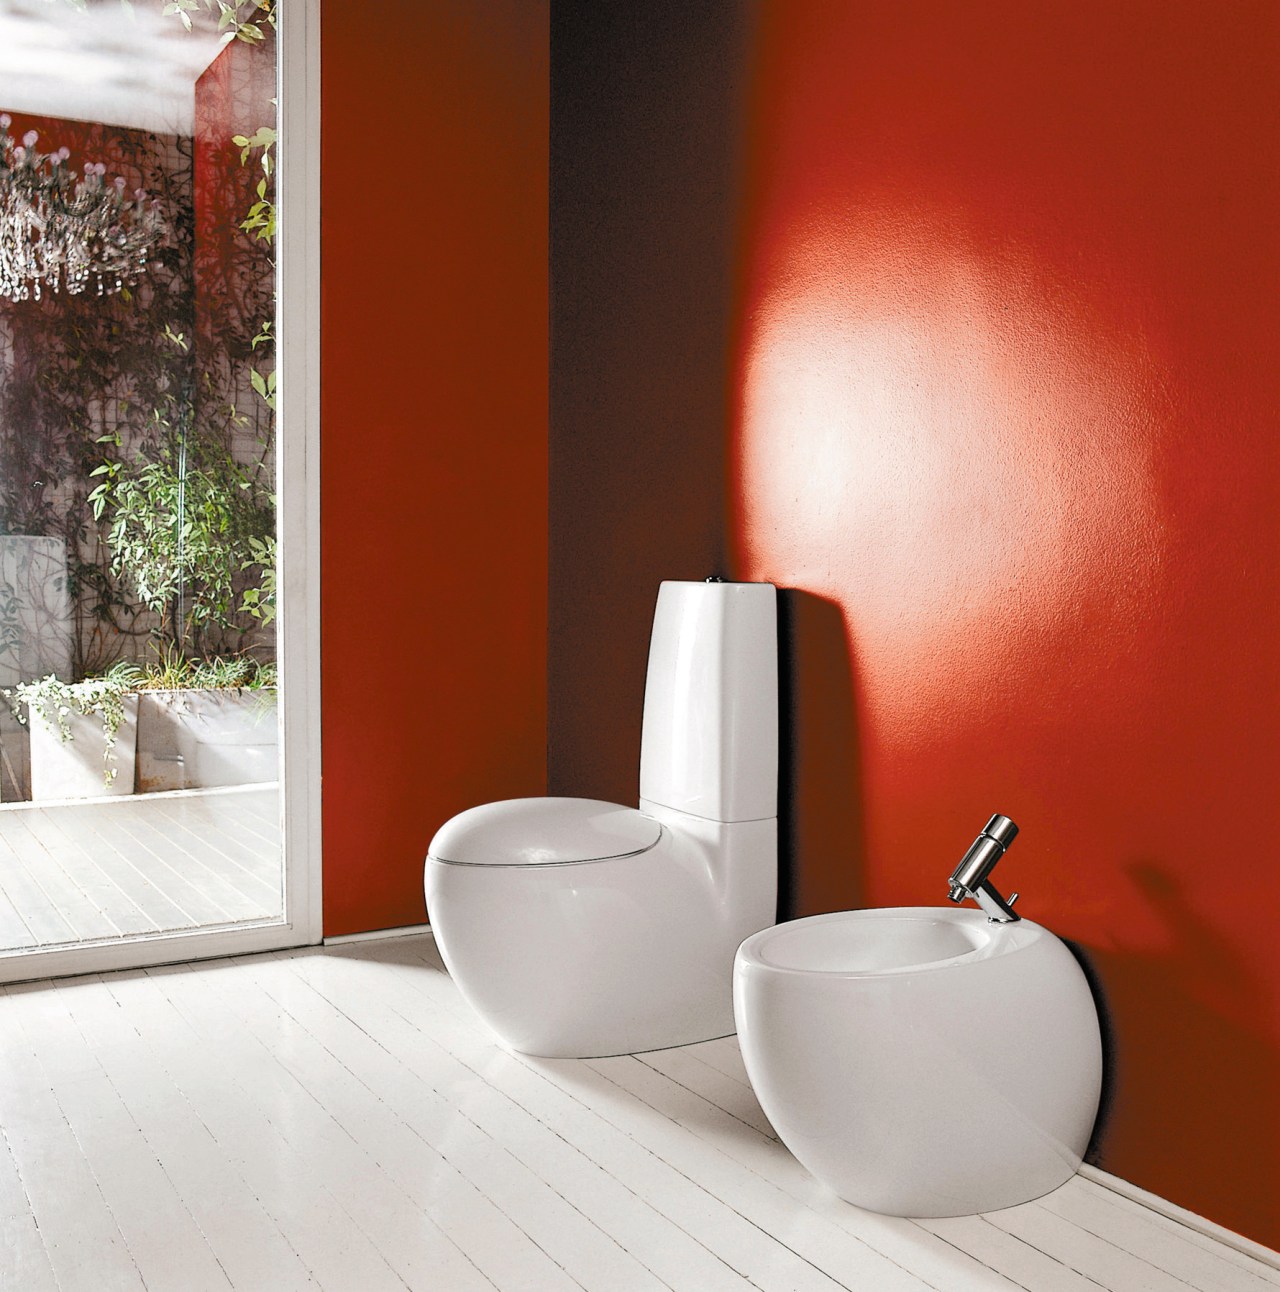 A view of the Alessi One range from bathroom, bidet, ceramic, floor, interior design, plumbing fixture, product design, sink, tap, toilet seat, white, red